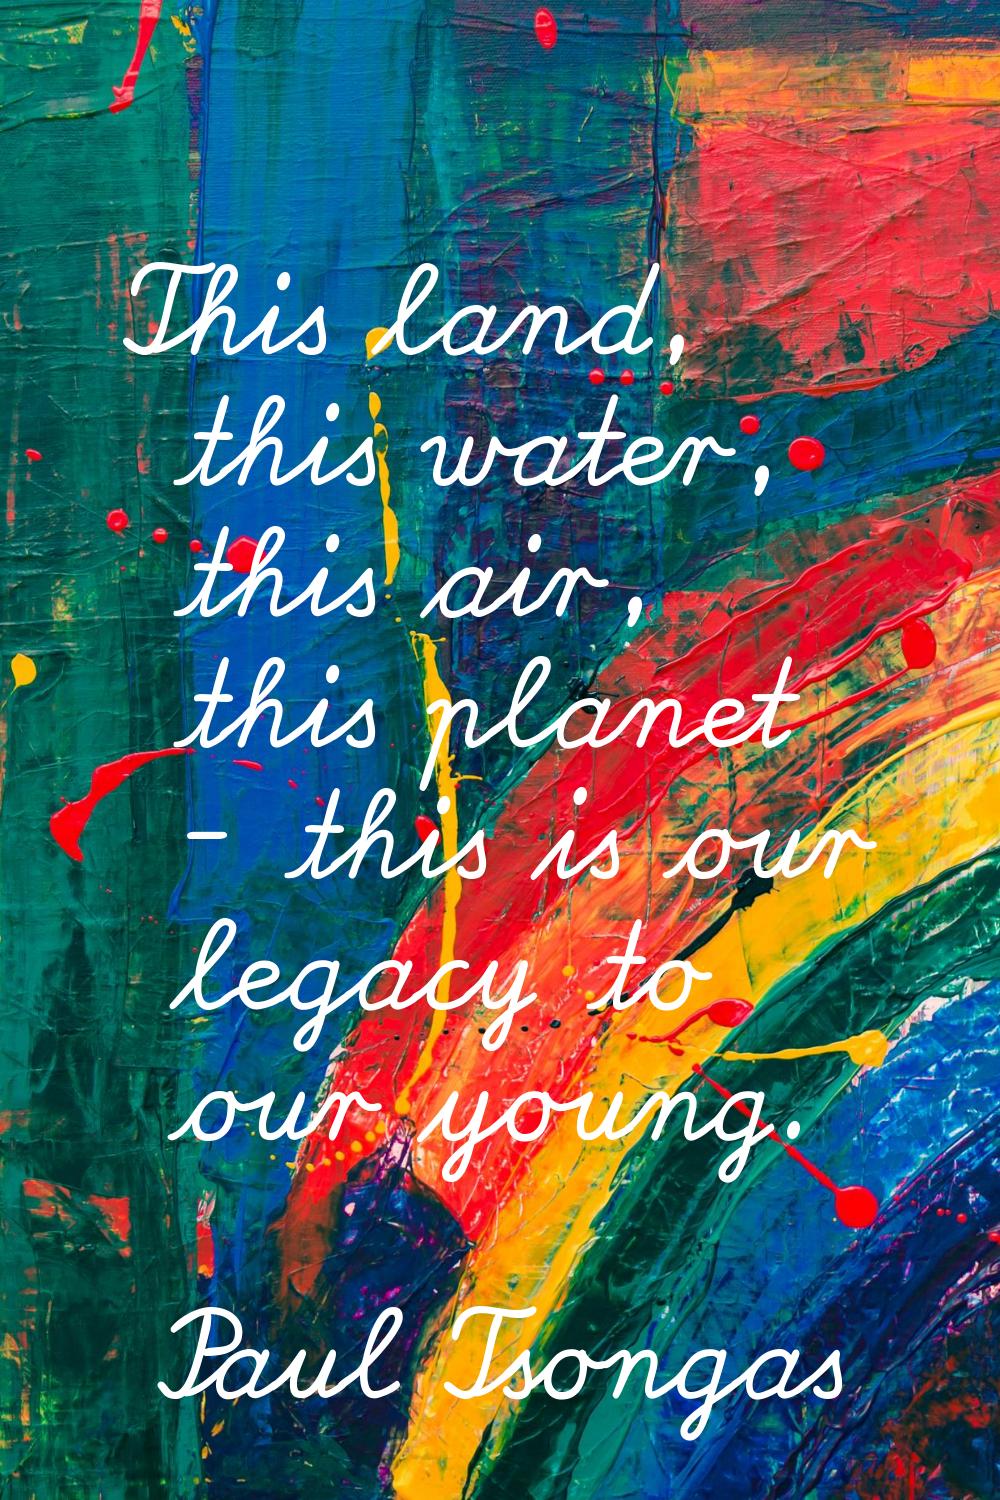 This land, this water, this air, this planet - this is our legacy to our young.